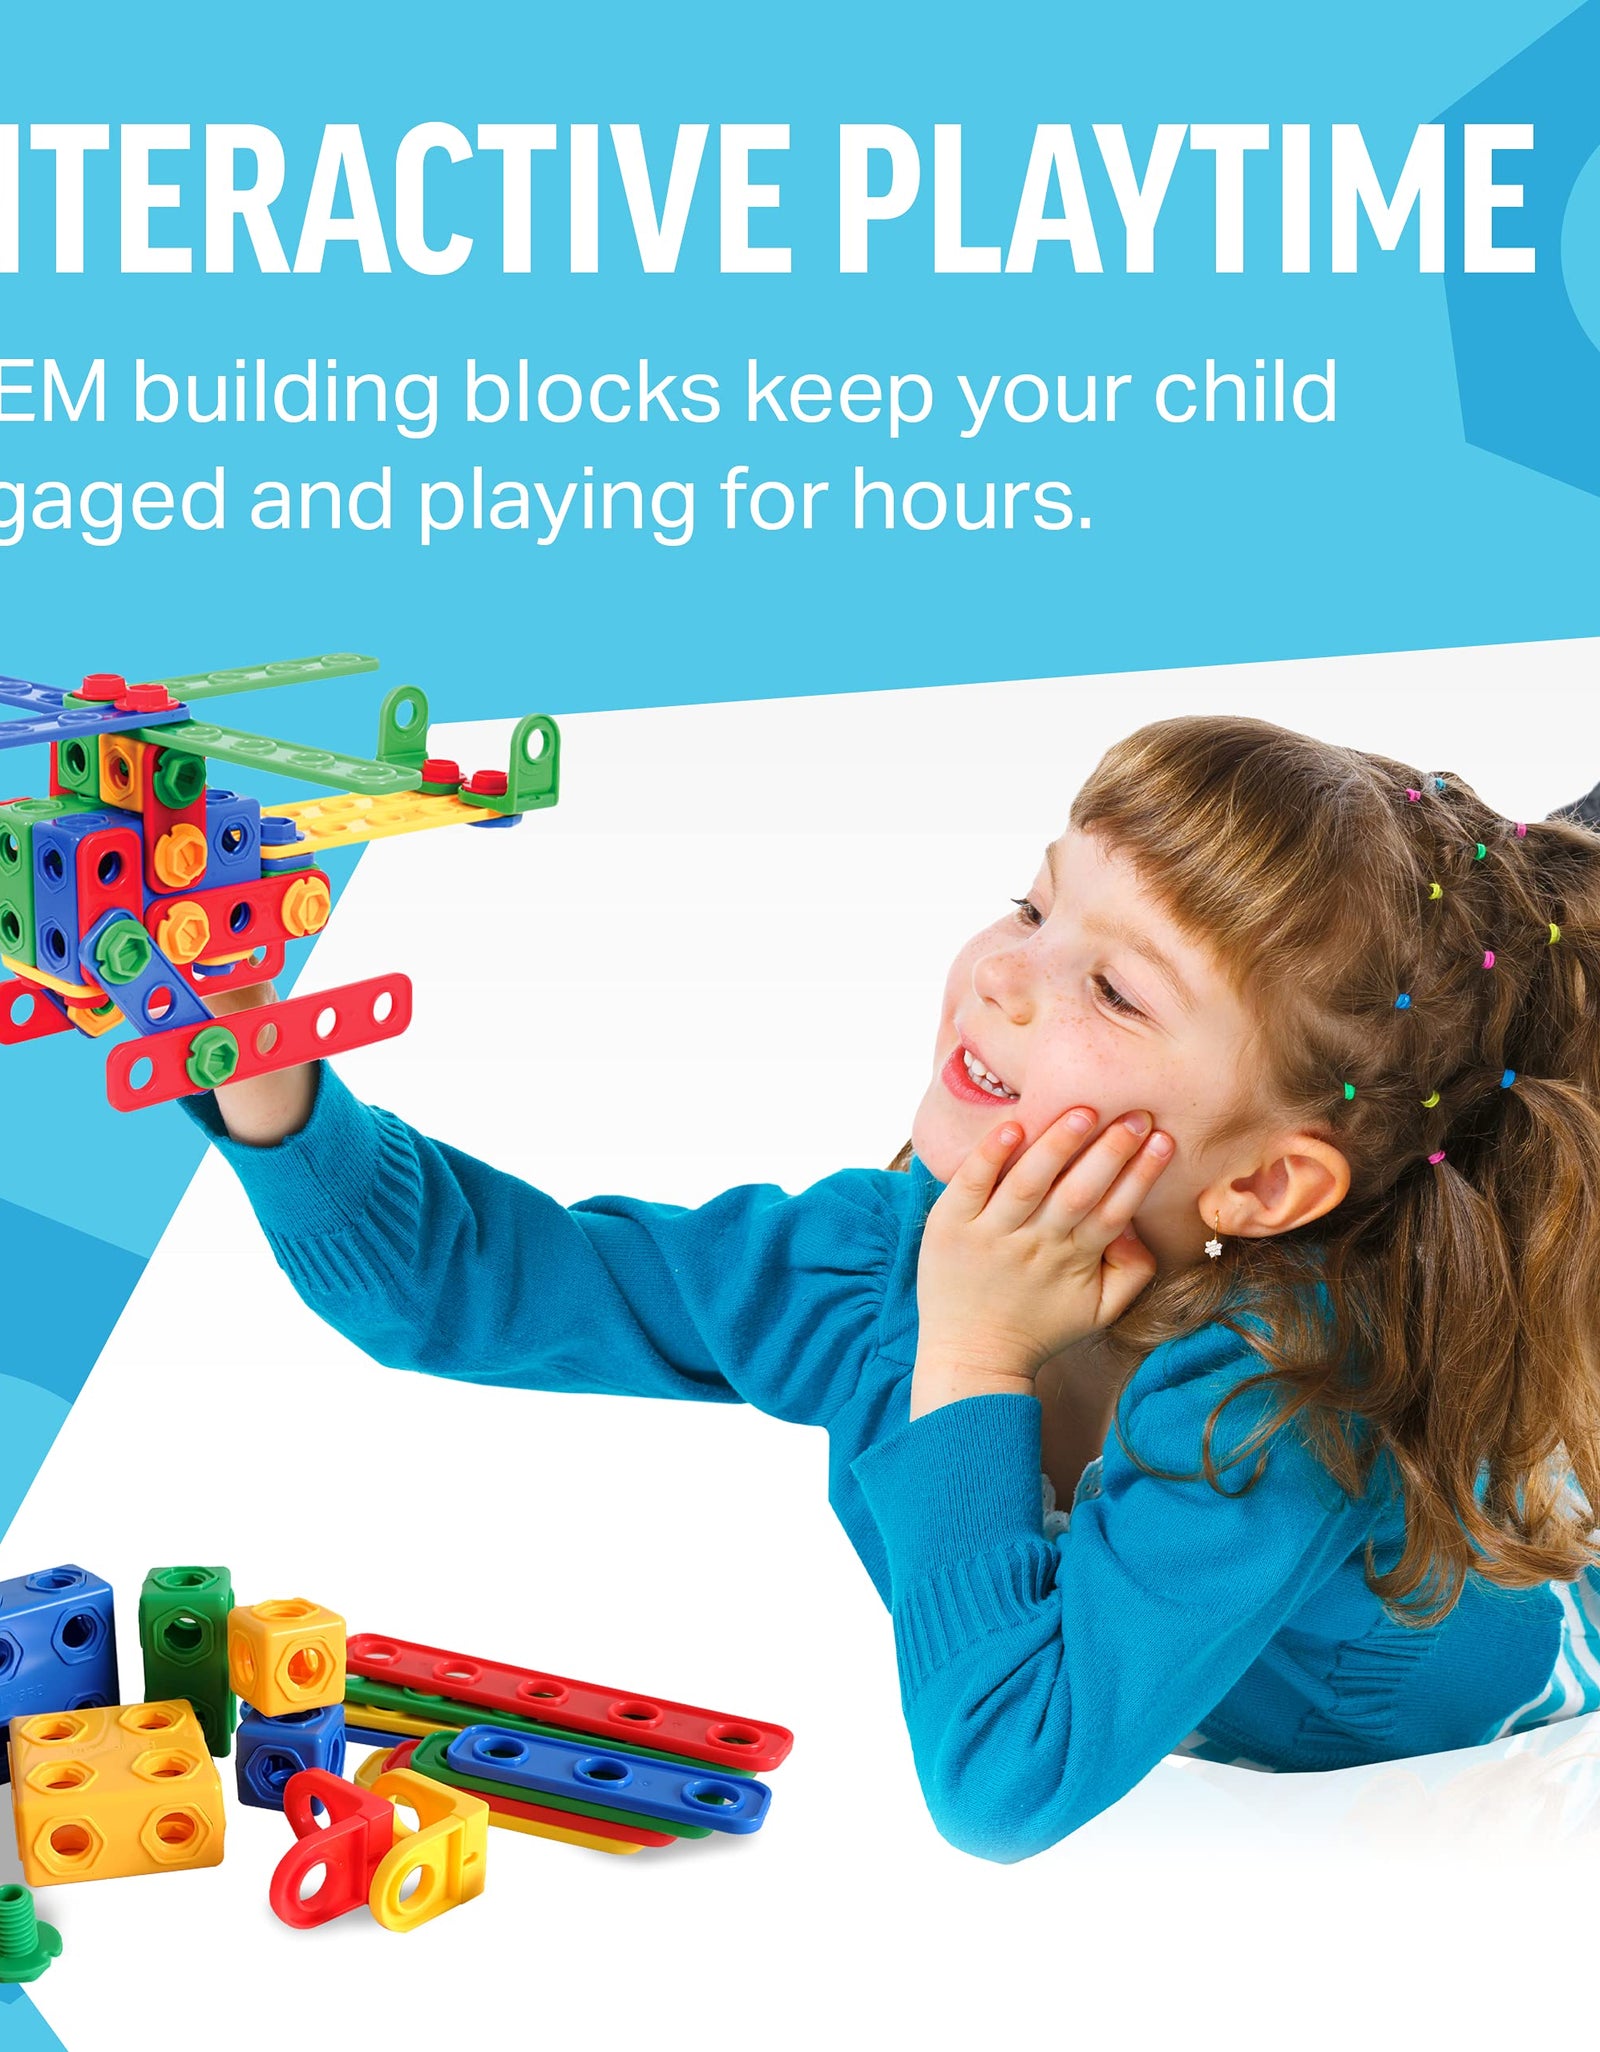 Brickyard Building Blocks STEM Toys & Activities - Educational Building Toys for Kids Ages 4-8 w/ 163 Pieces, Kid-Friendly Tools, Design Guide and Toy Storage Box